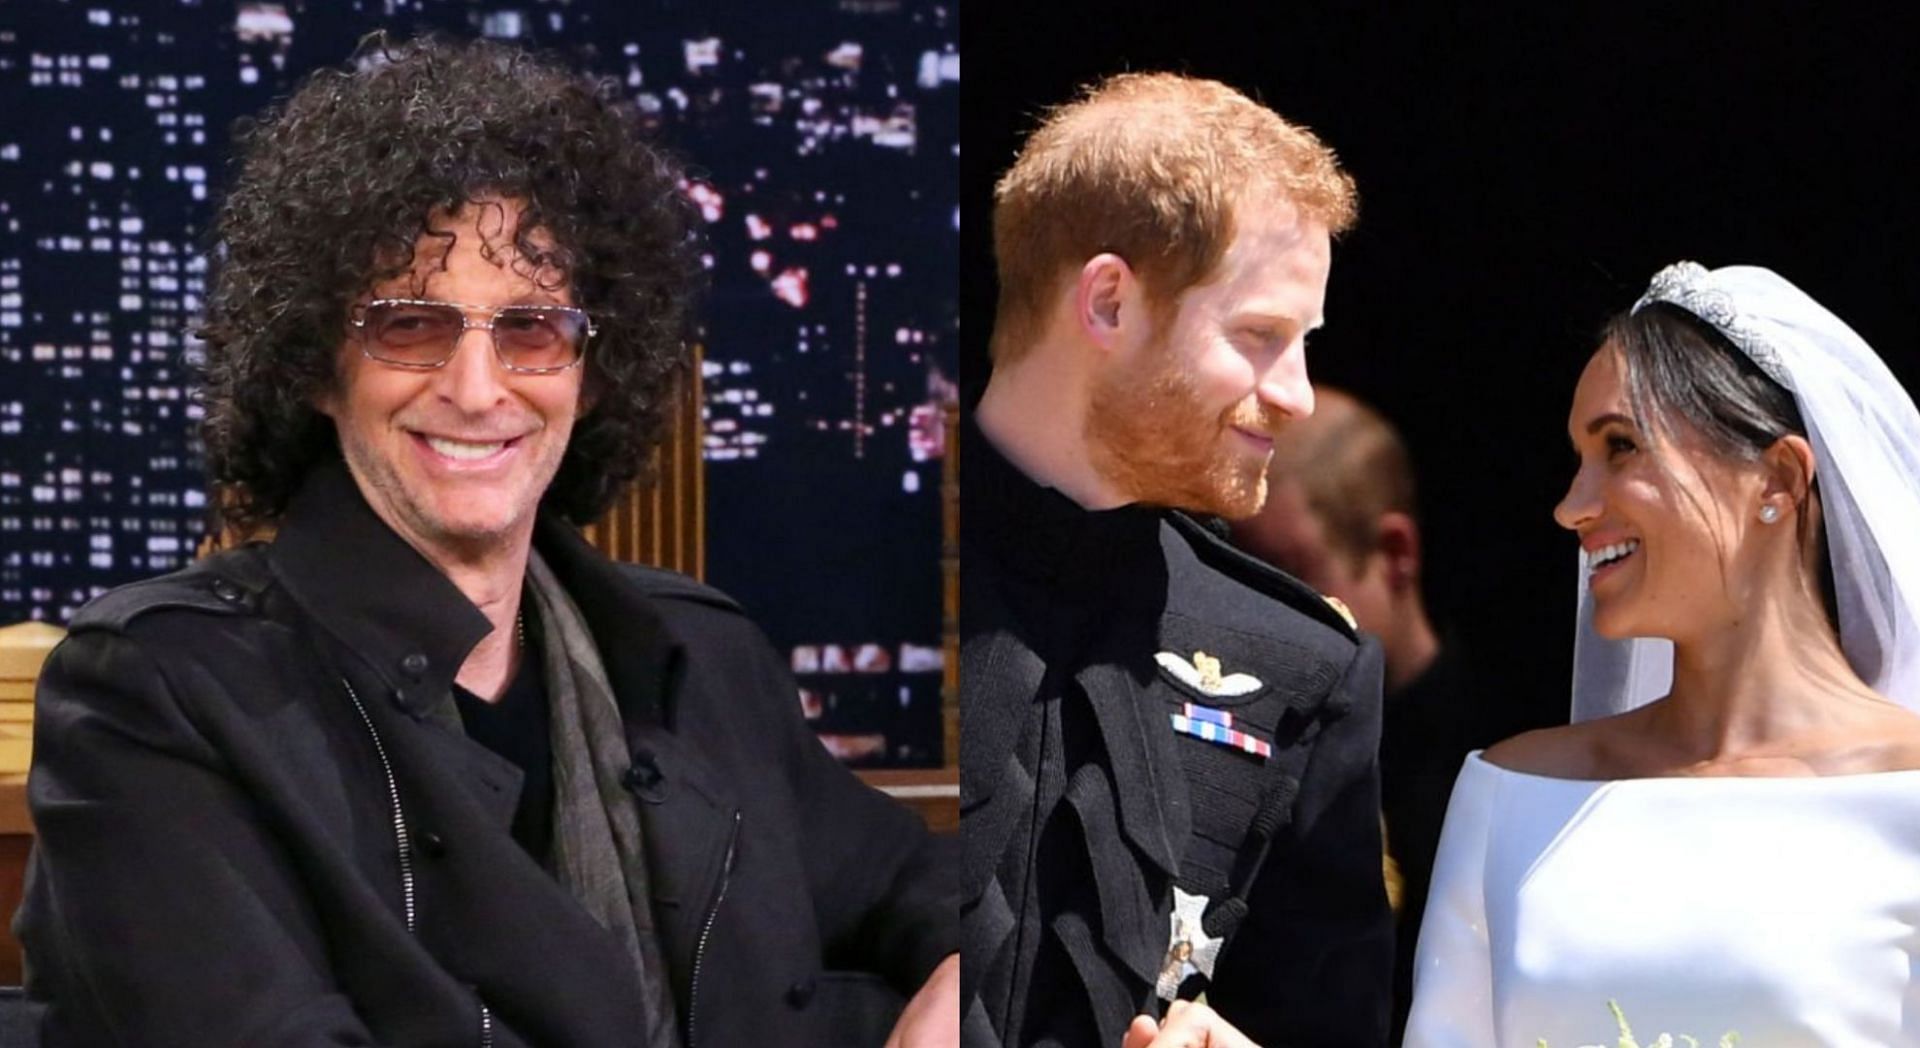 Howard Stern called out Prince Harry and Meghan Markle over their new Netflix docuseries (Image via Getty Images)